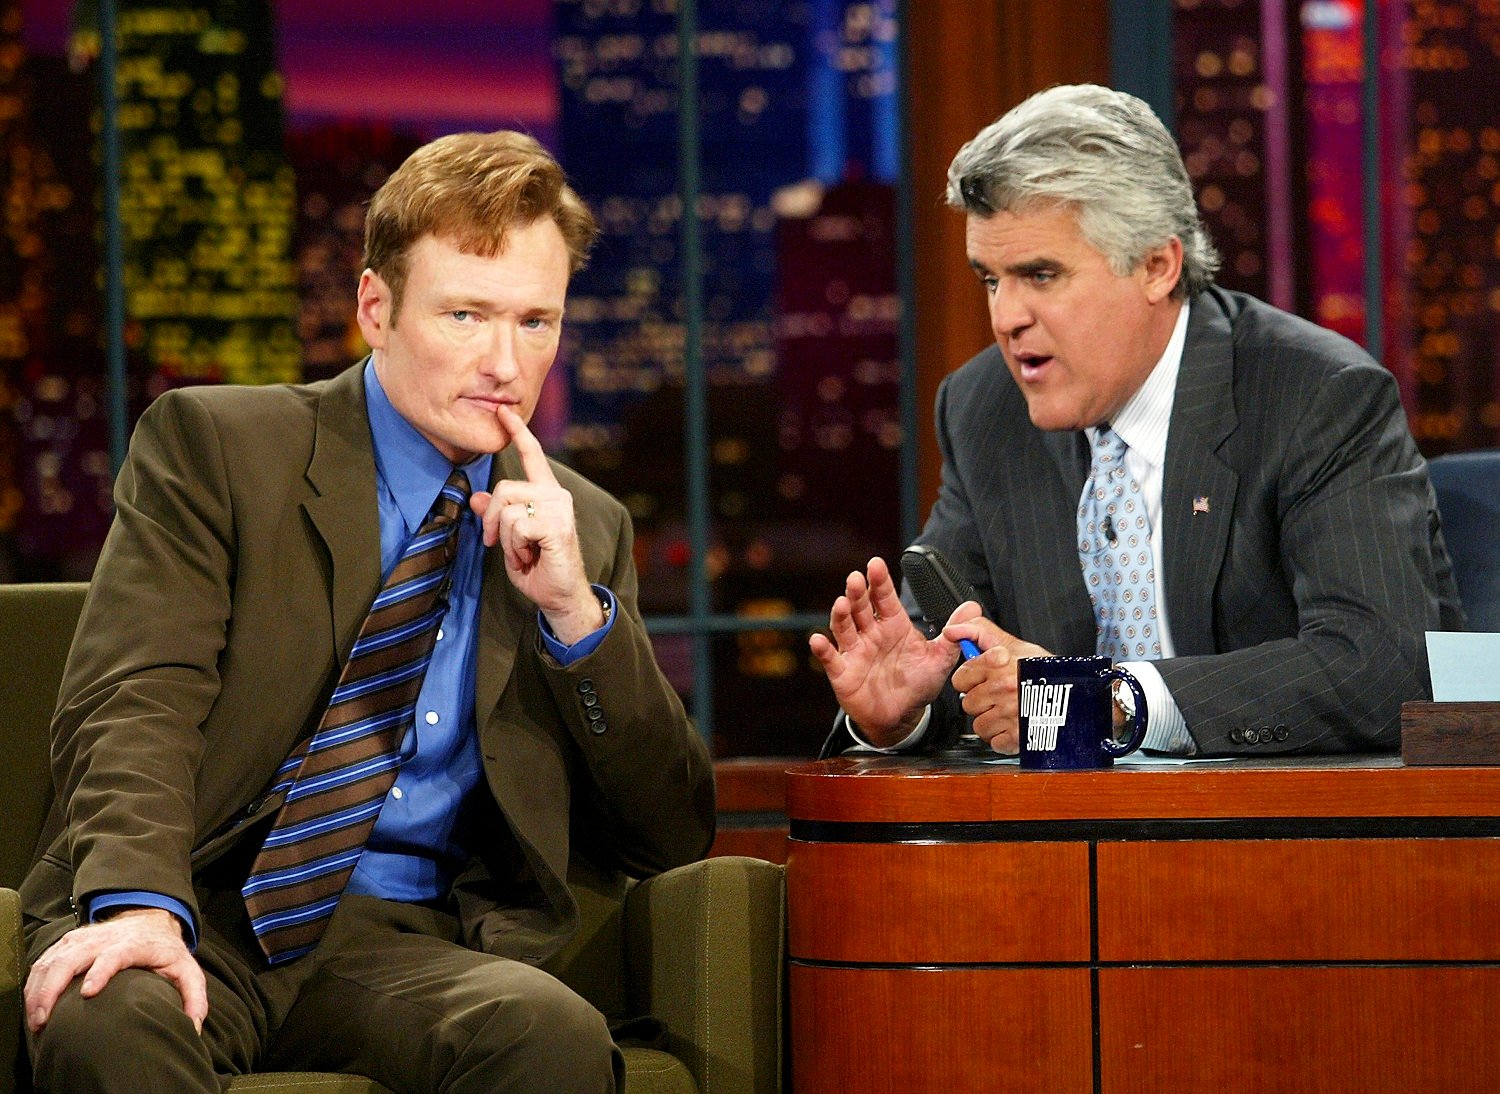 Conan O'Brien interviewed by Jay Leno on 'The Tonight Show with Jay Leno'